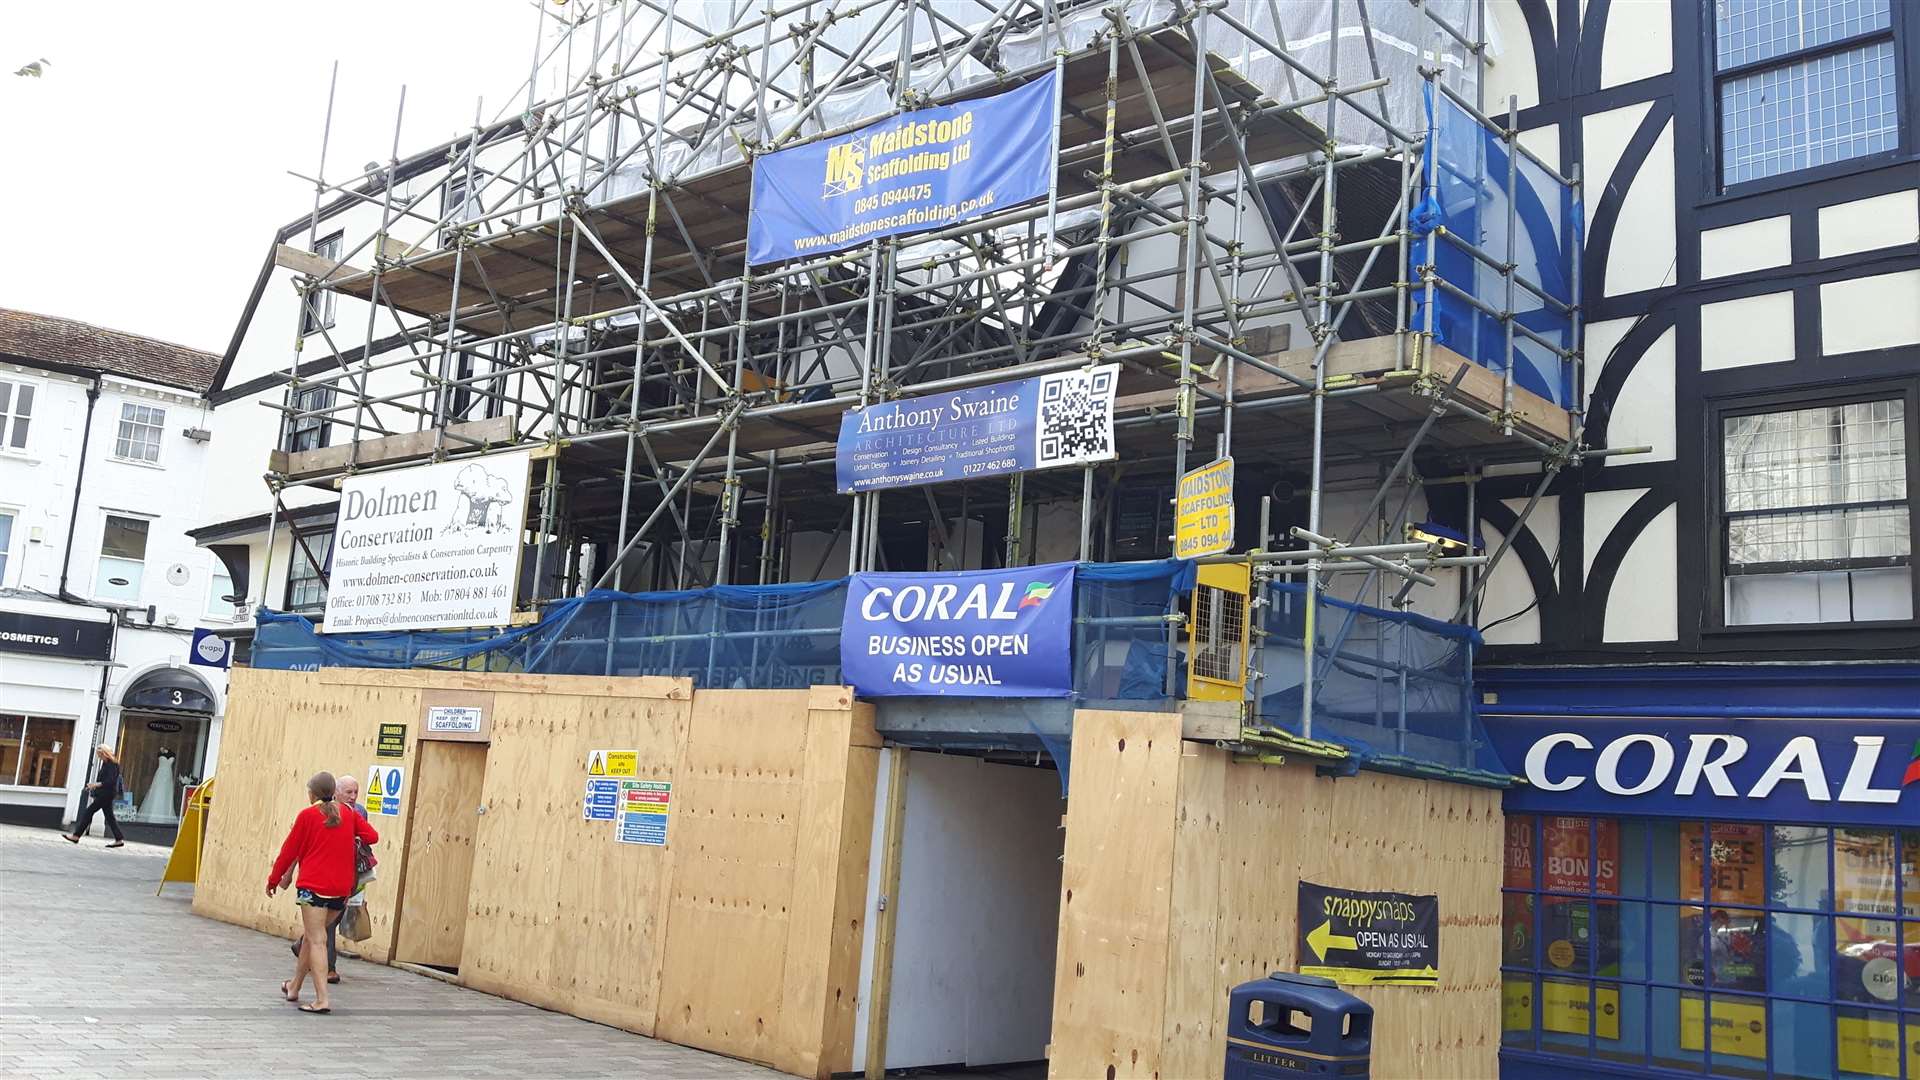 What lies behind the scaffolding in Maidstone High Street?